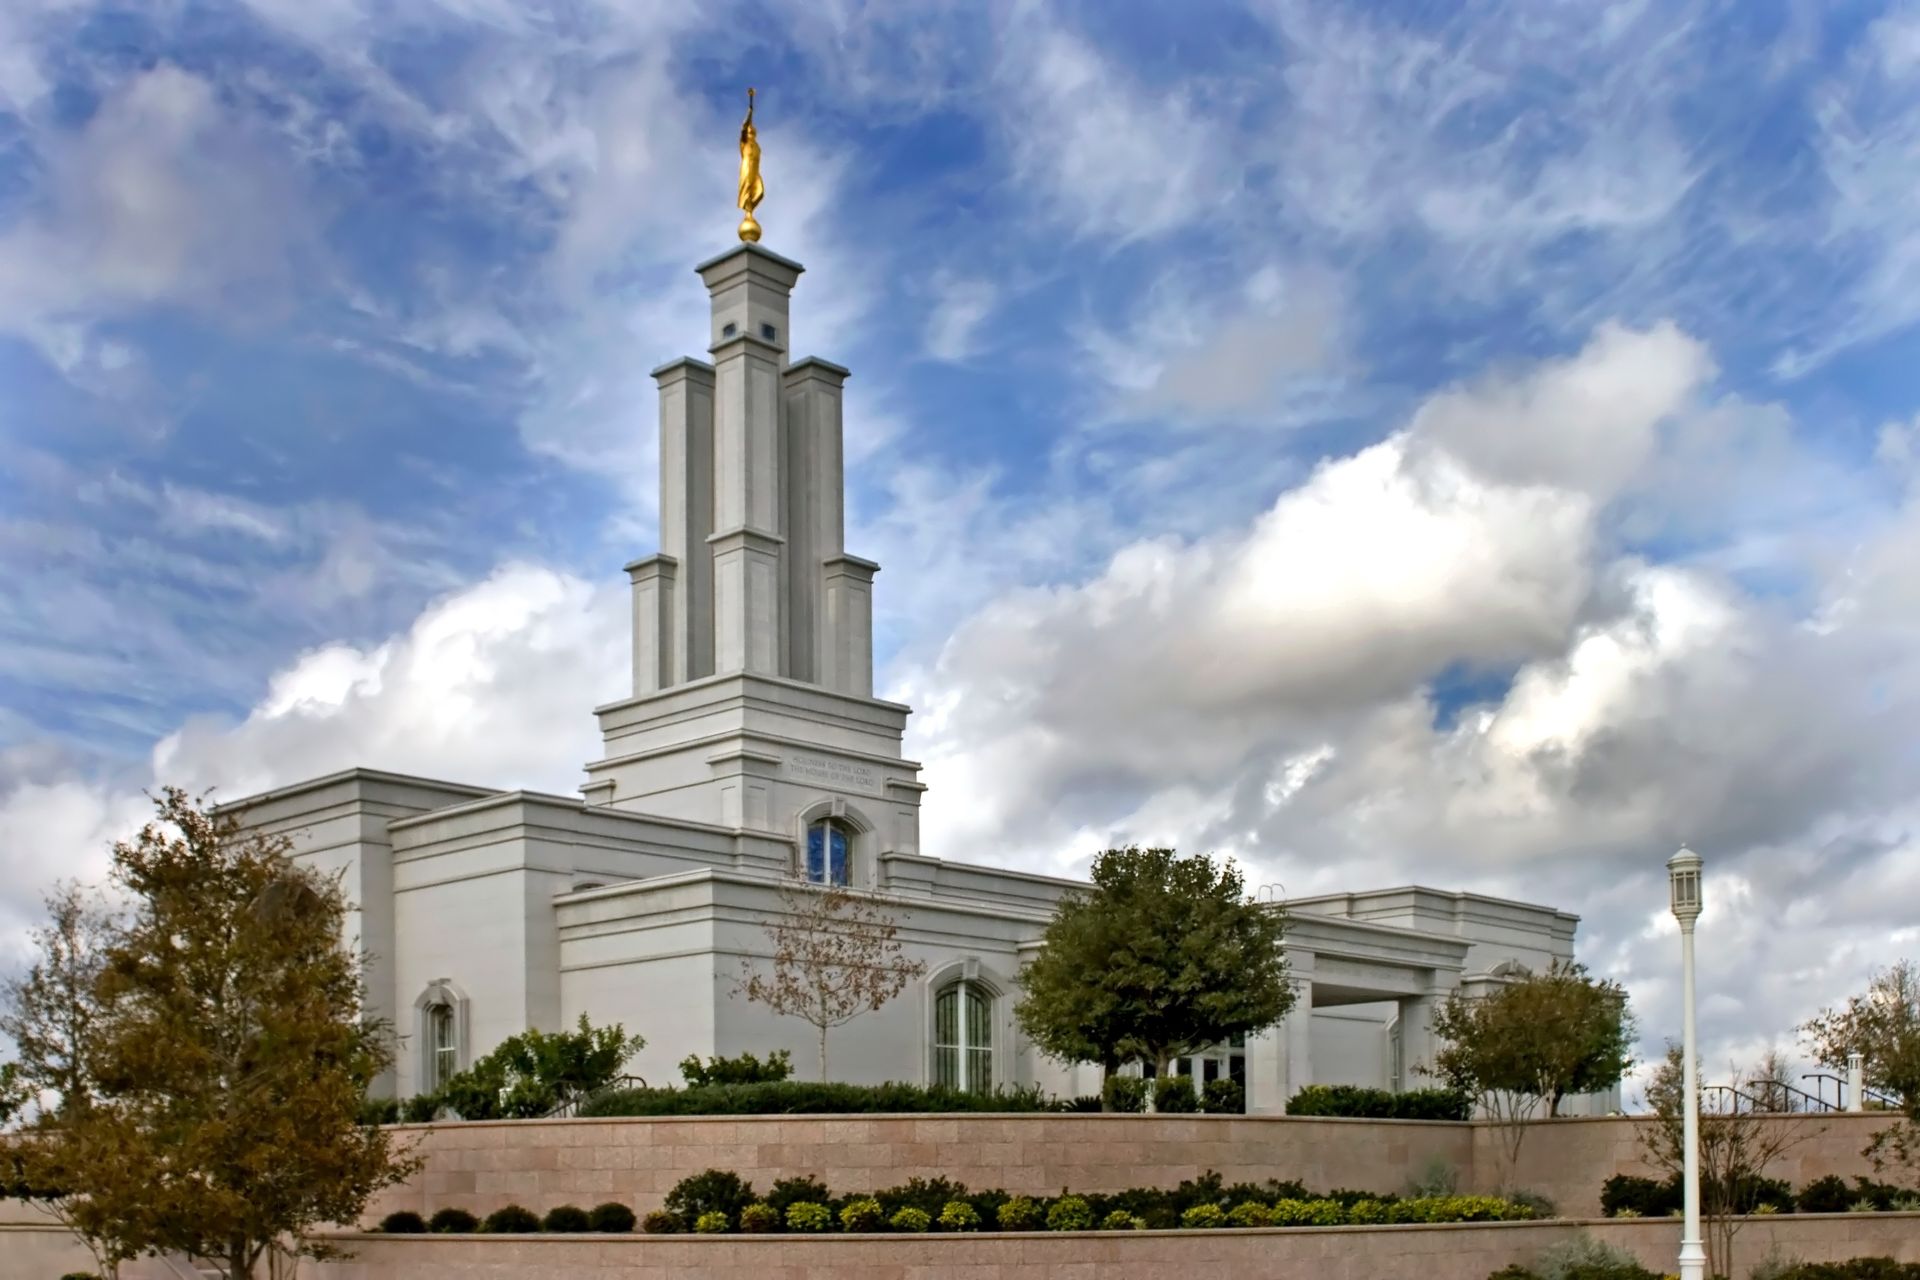 The San Antonio Texas Temple on a partly cloudy day.